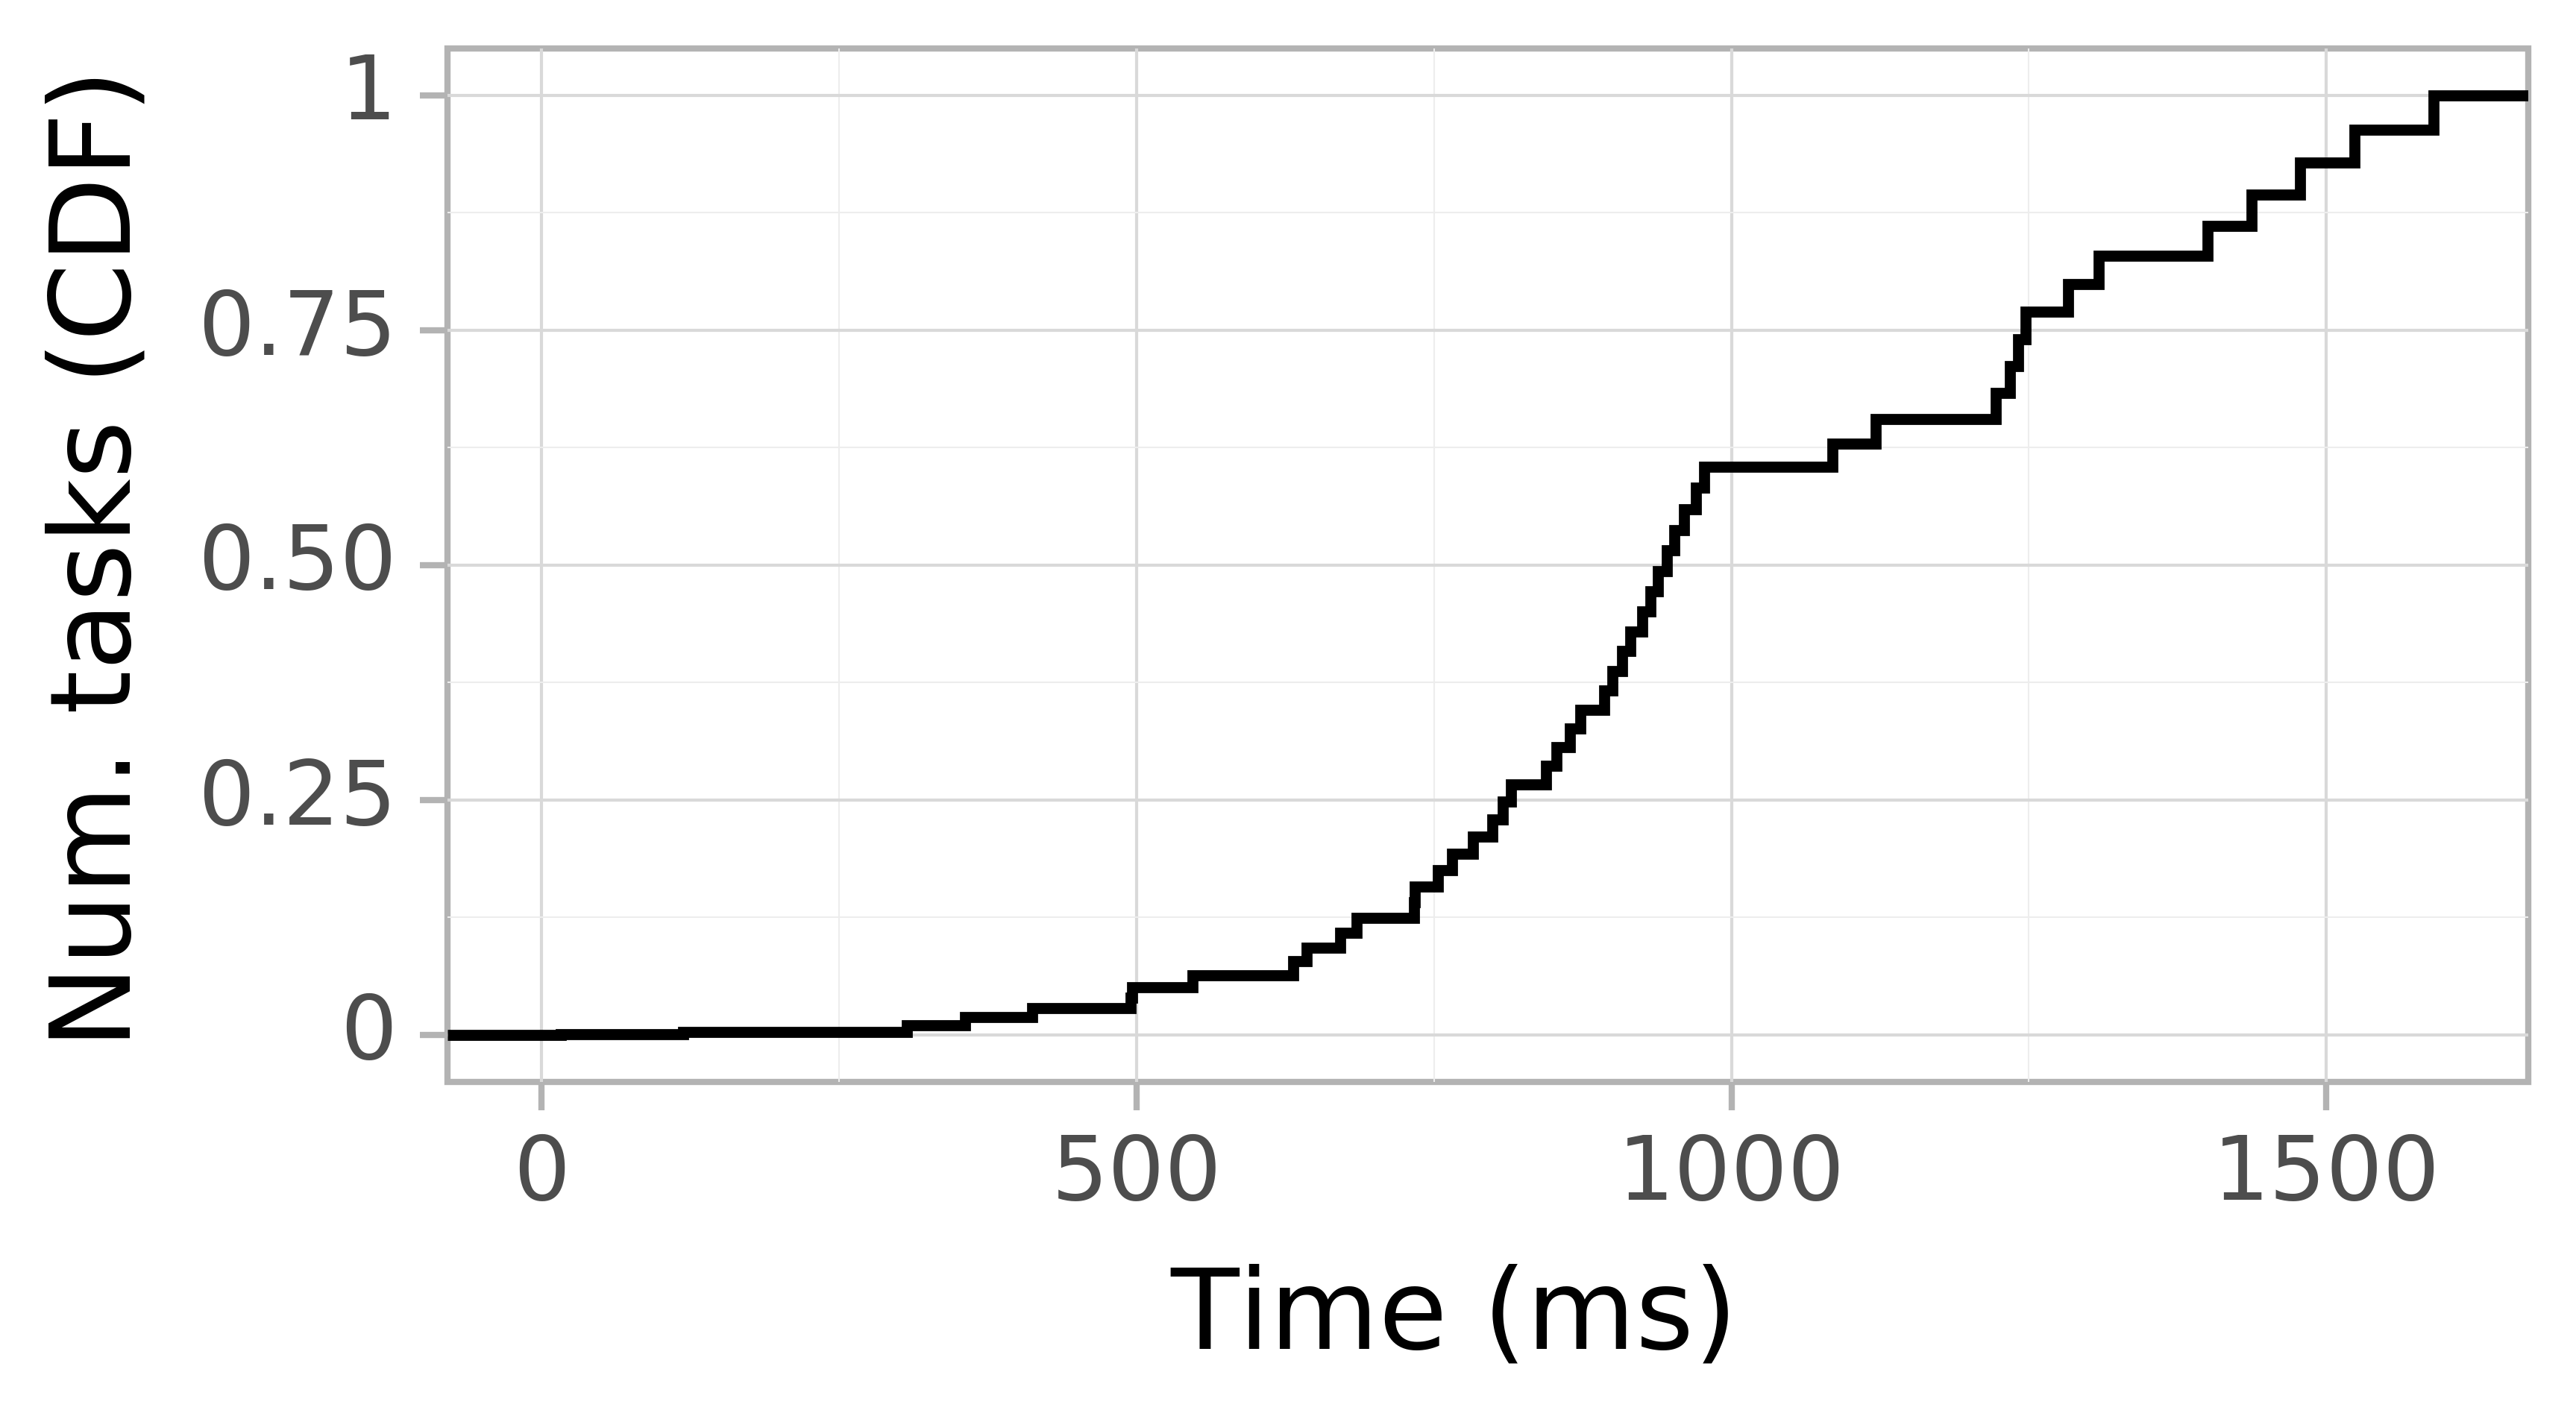 Task arrival CDF graph for the Pegasus_P6b trace.